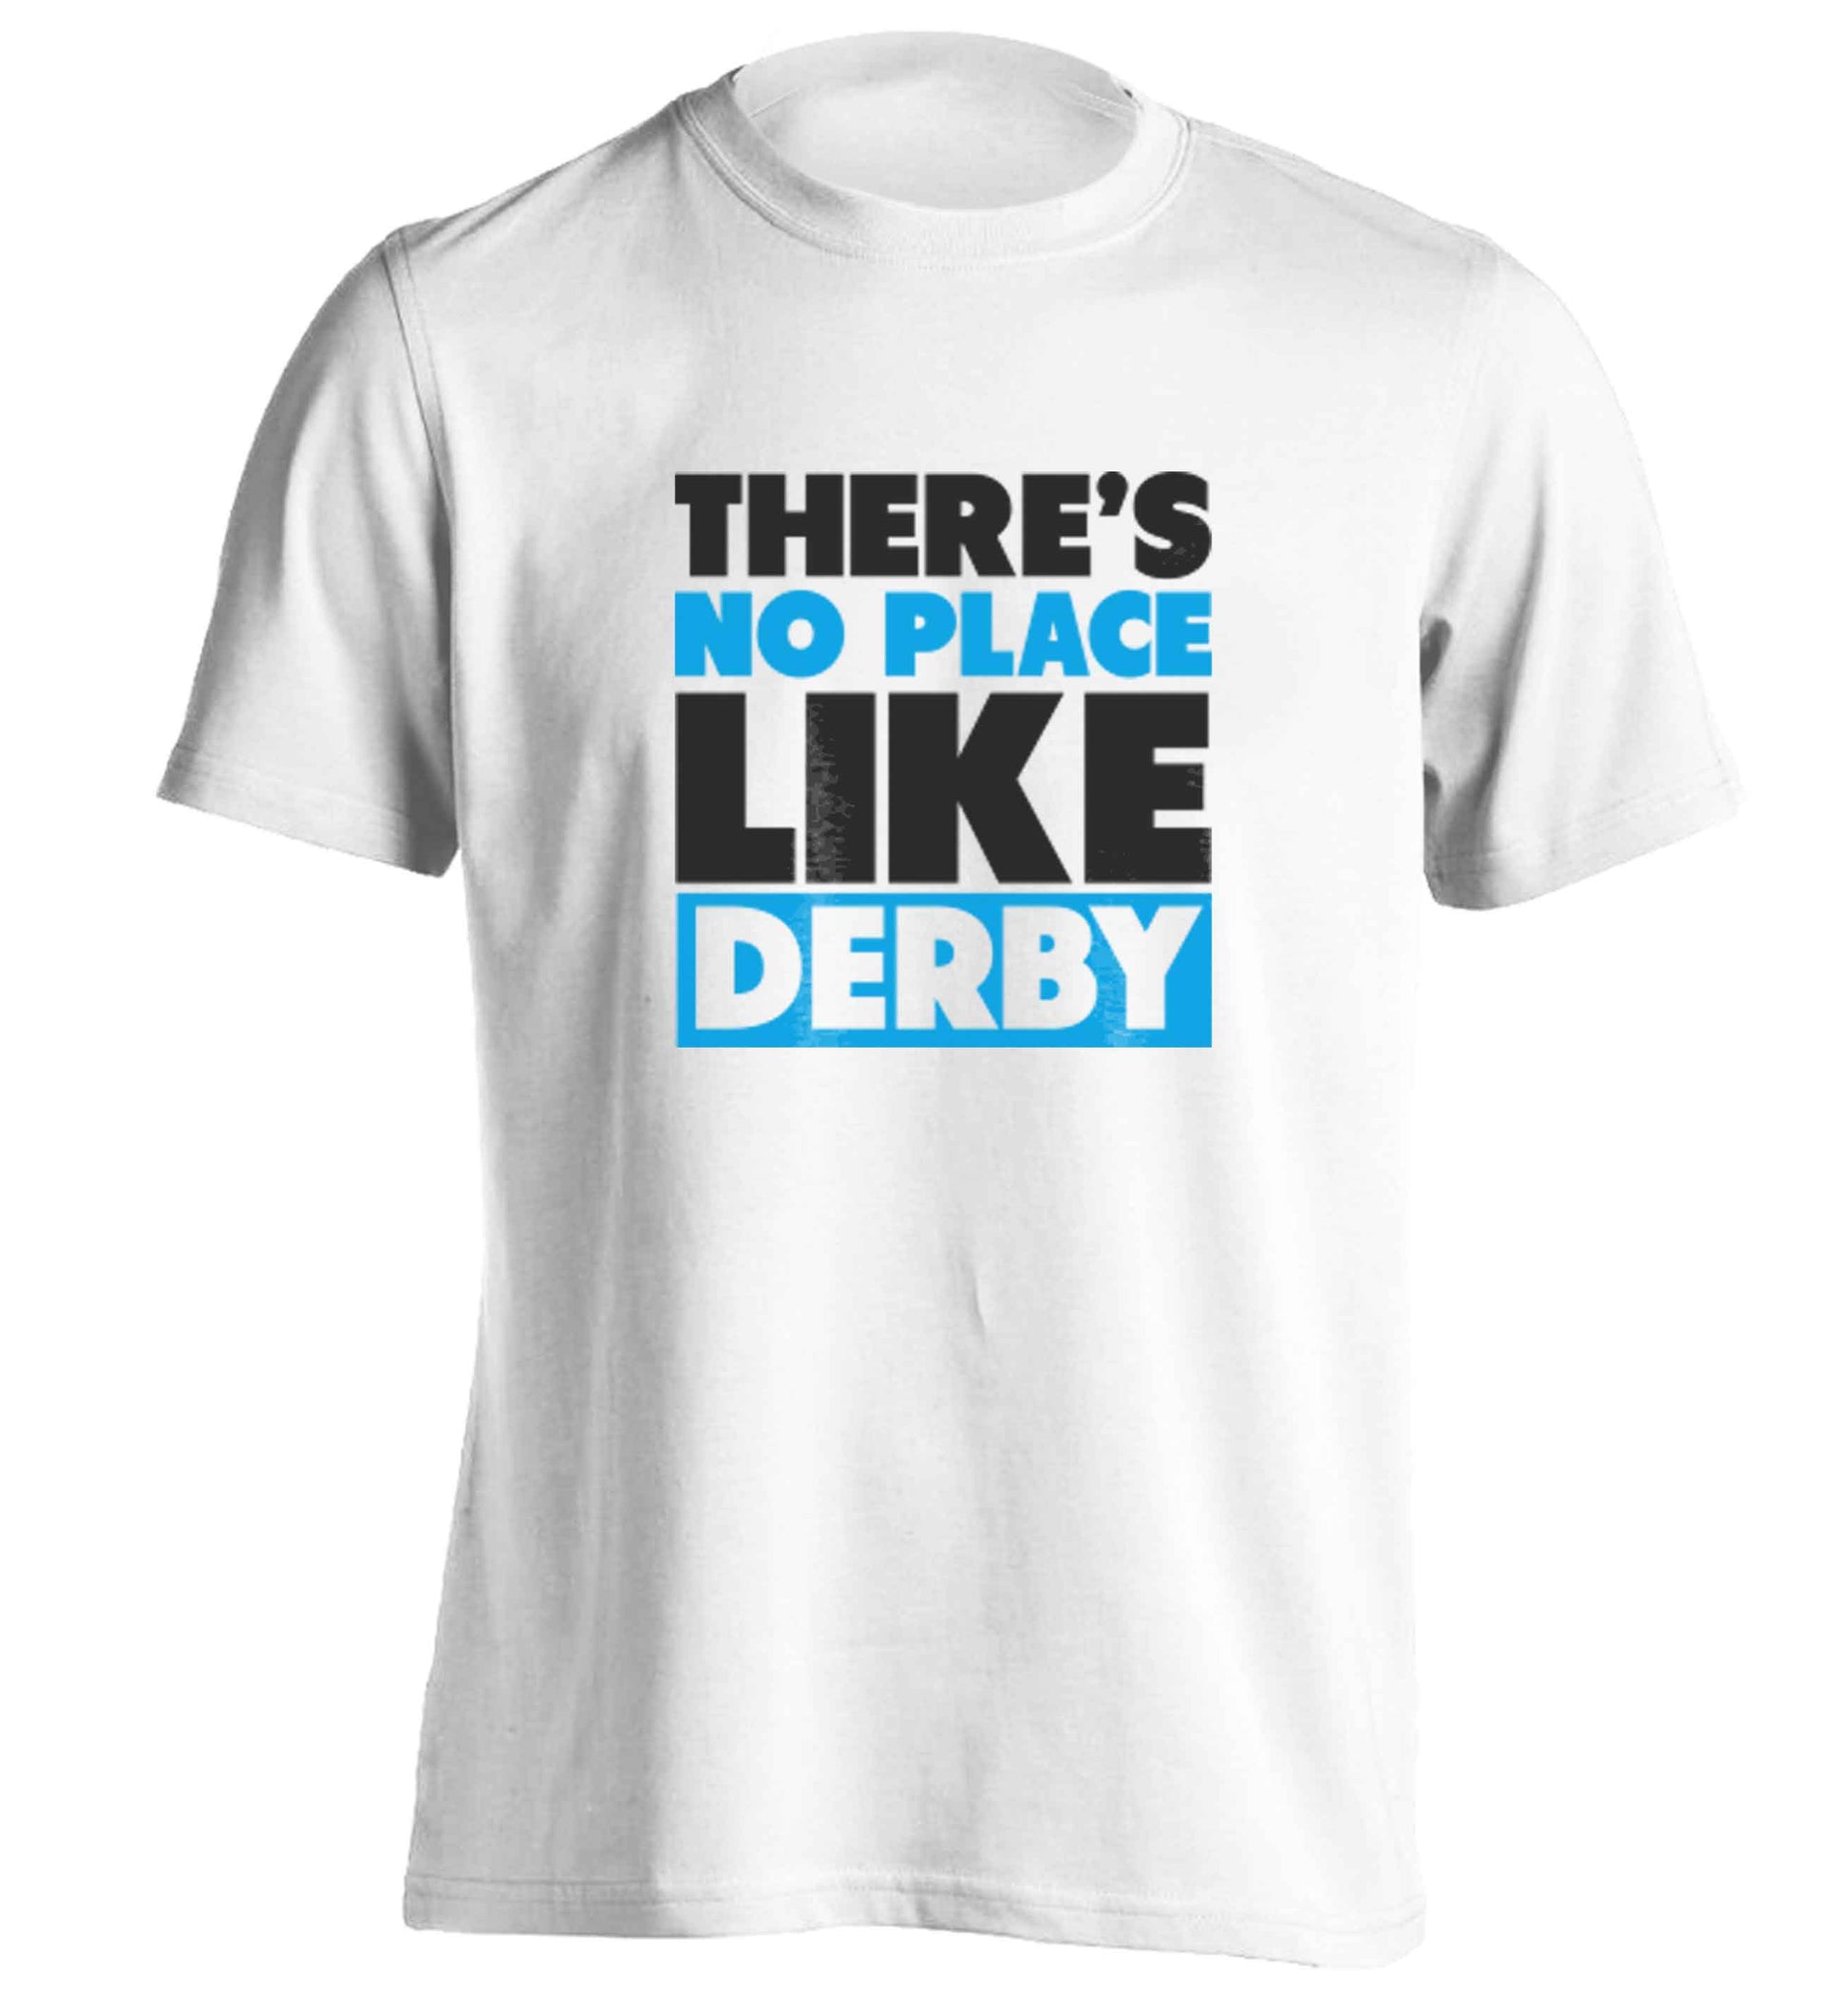 There's no place like Derby adults unisex white Tshirt 2XL